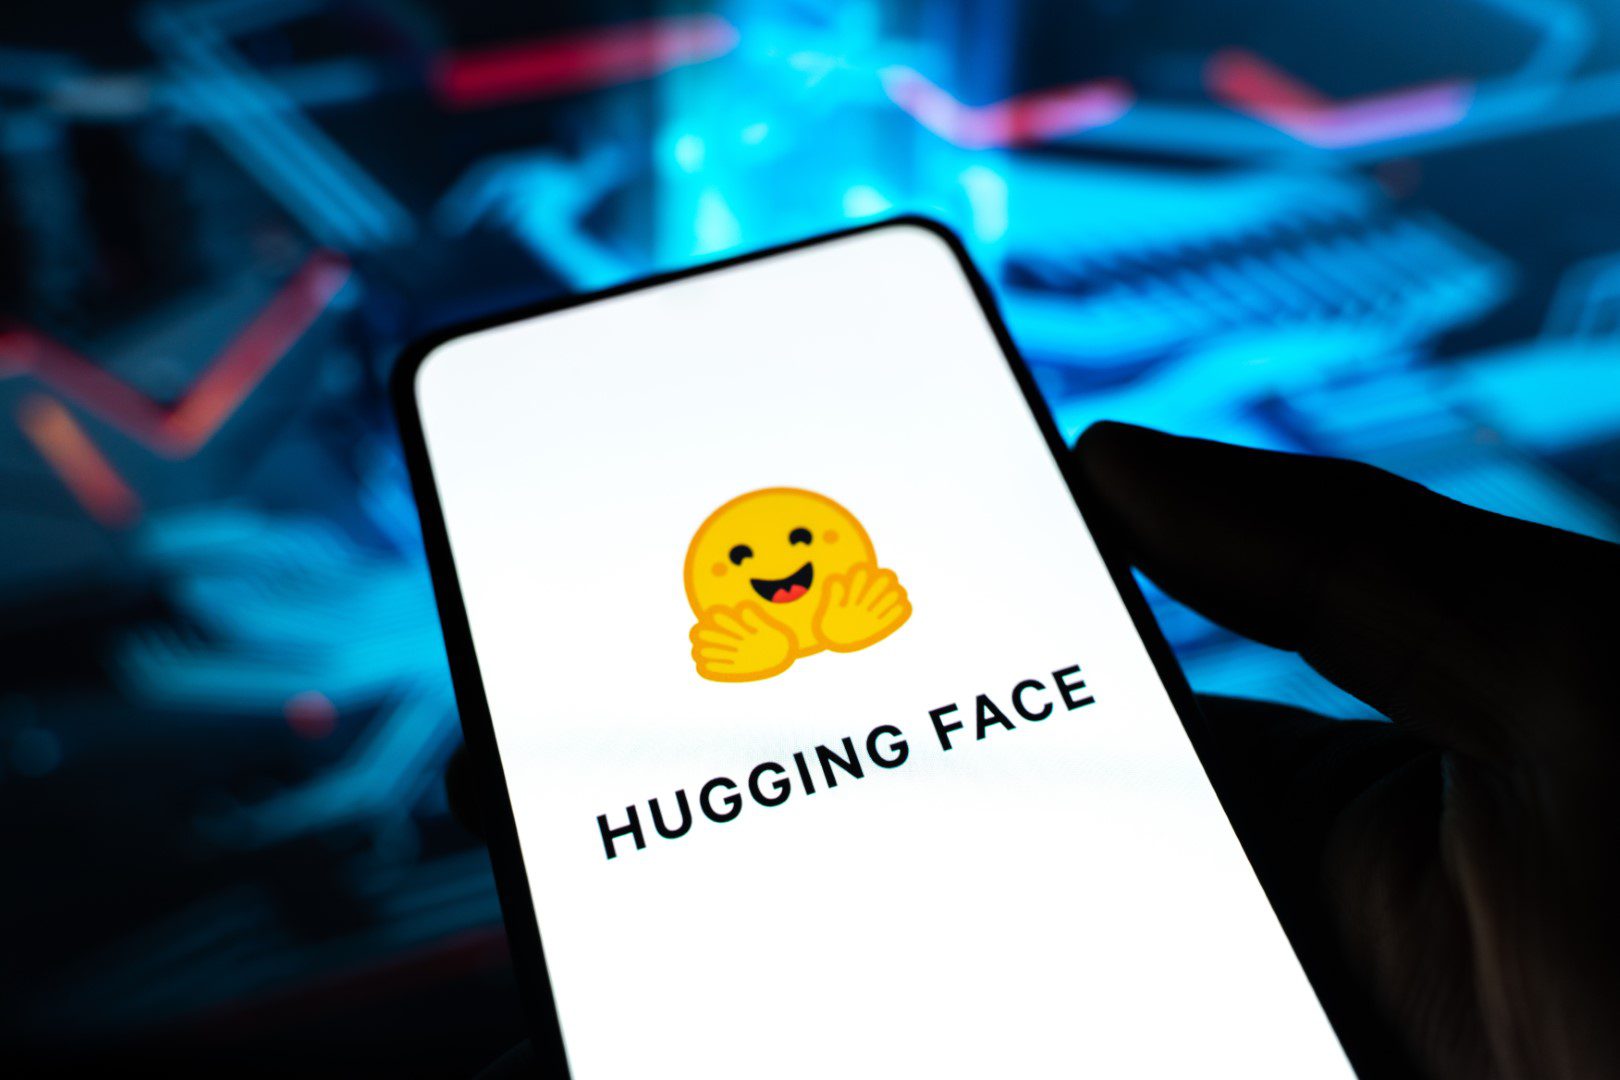 Hugging Face is donating $10 million of computing power to small AI companies